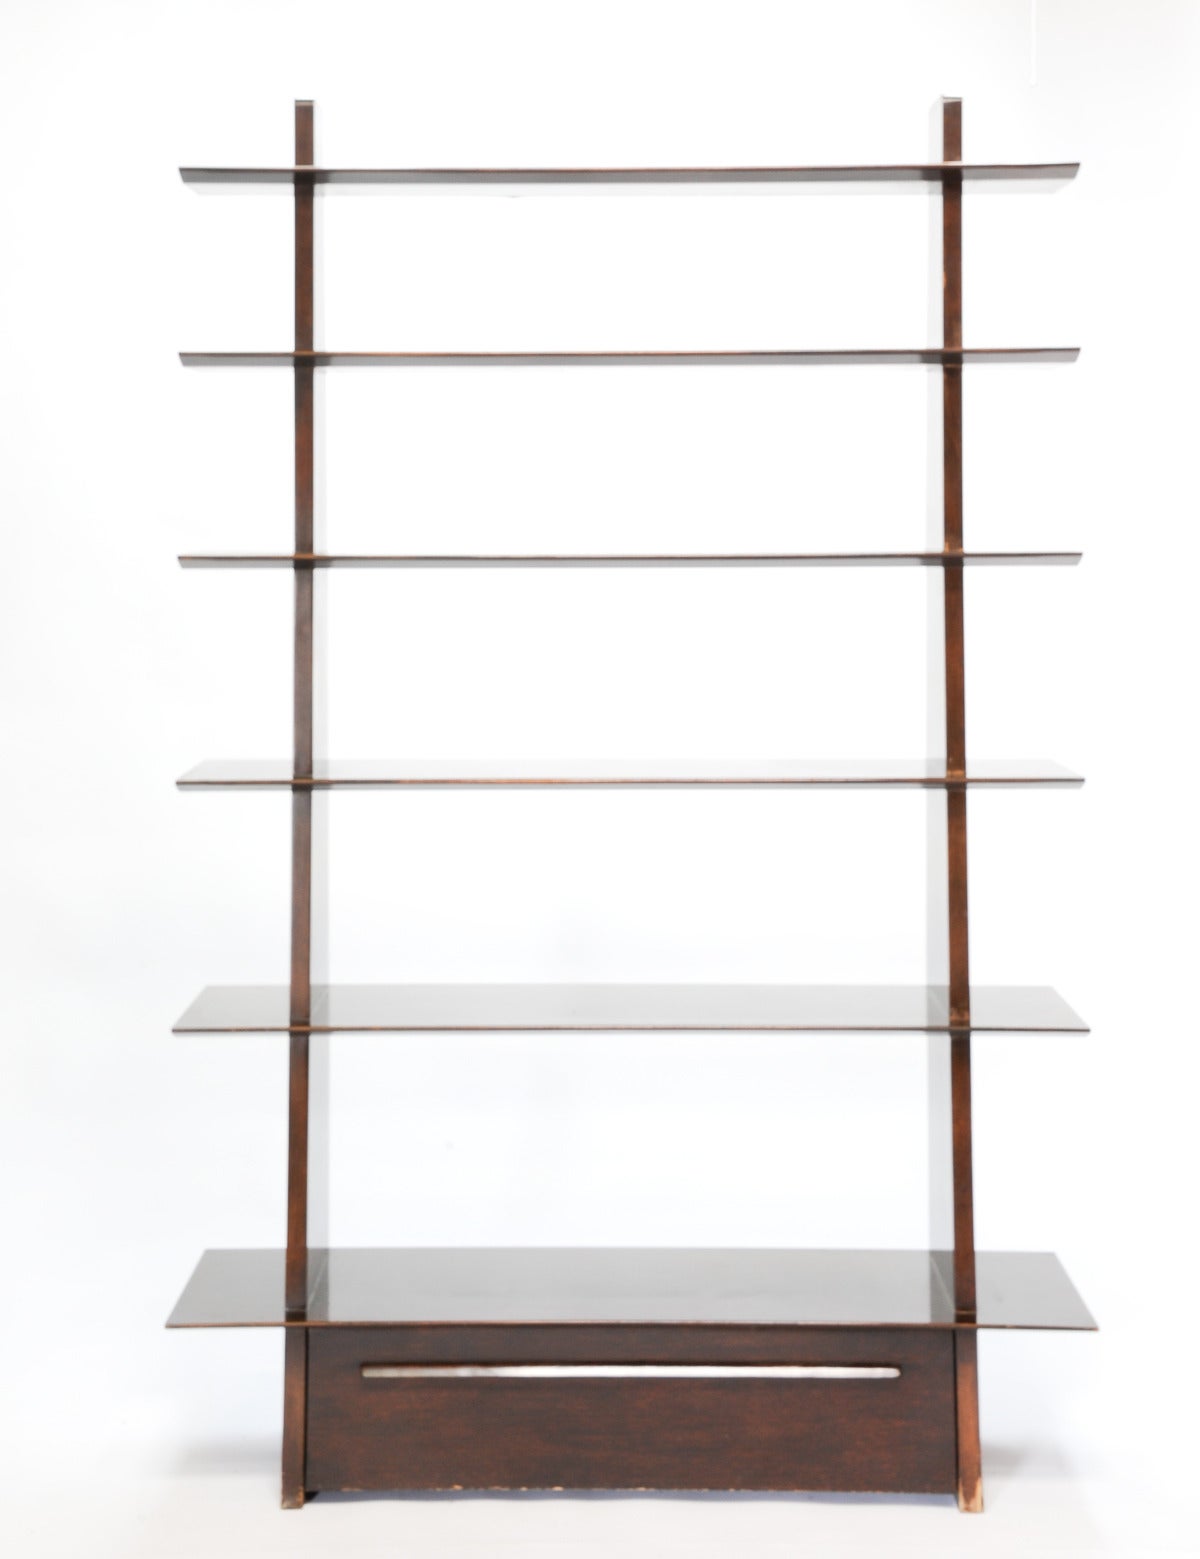 This is an early green label dunbar bookcase for Dunbar designered by Edward Wormley.  The green label Dunbar pieces are from the height of Wormley's design period and the refinement of the Swedish craftmanship of the Berne IN manufacturing.